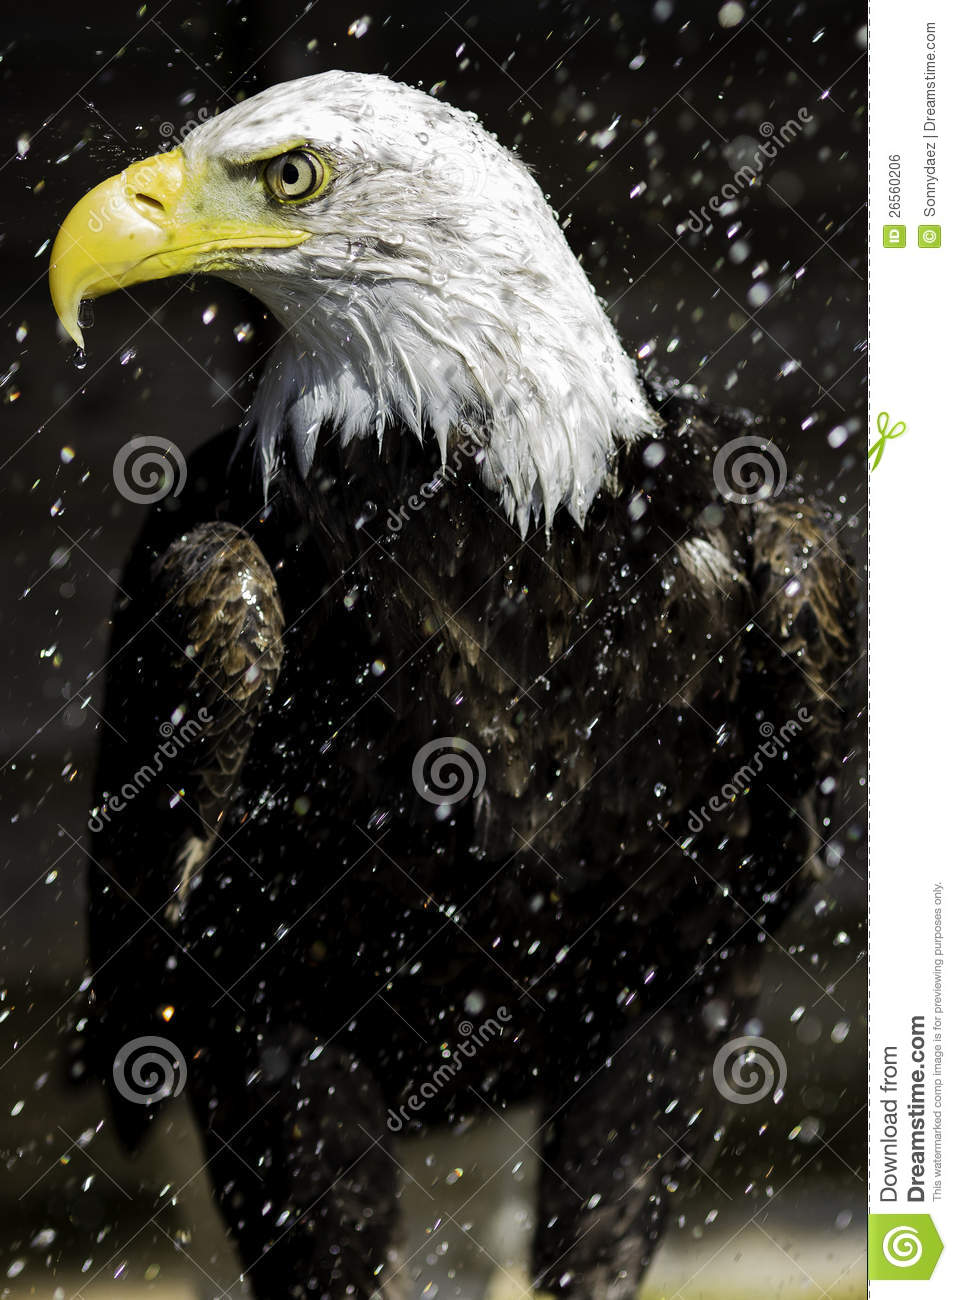 Bald Eagle In The Rain Royalty Free Stock Image   Image  26560206